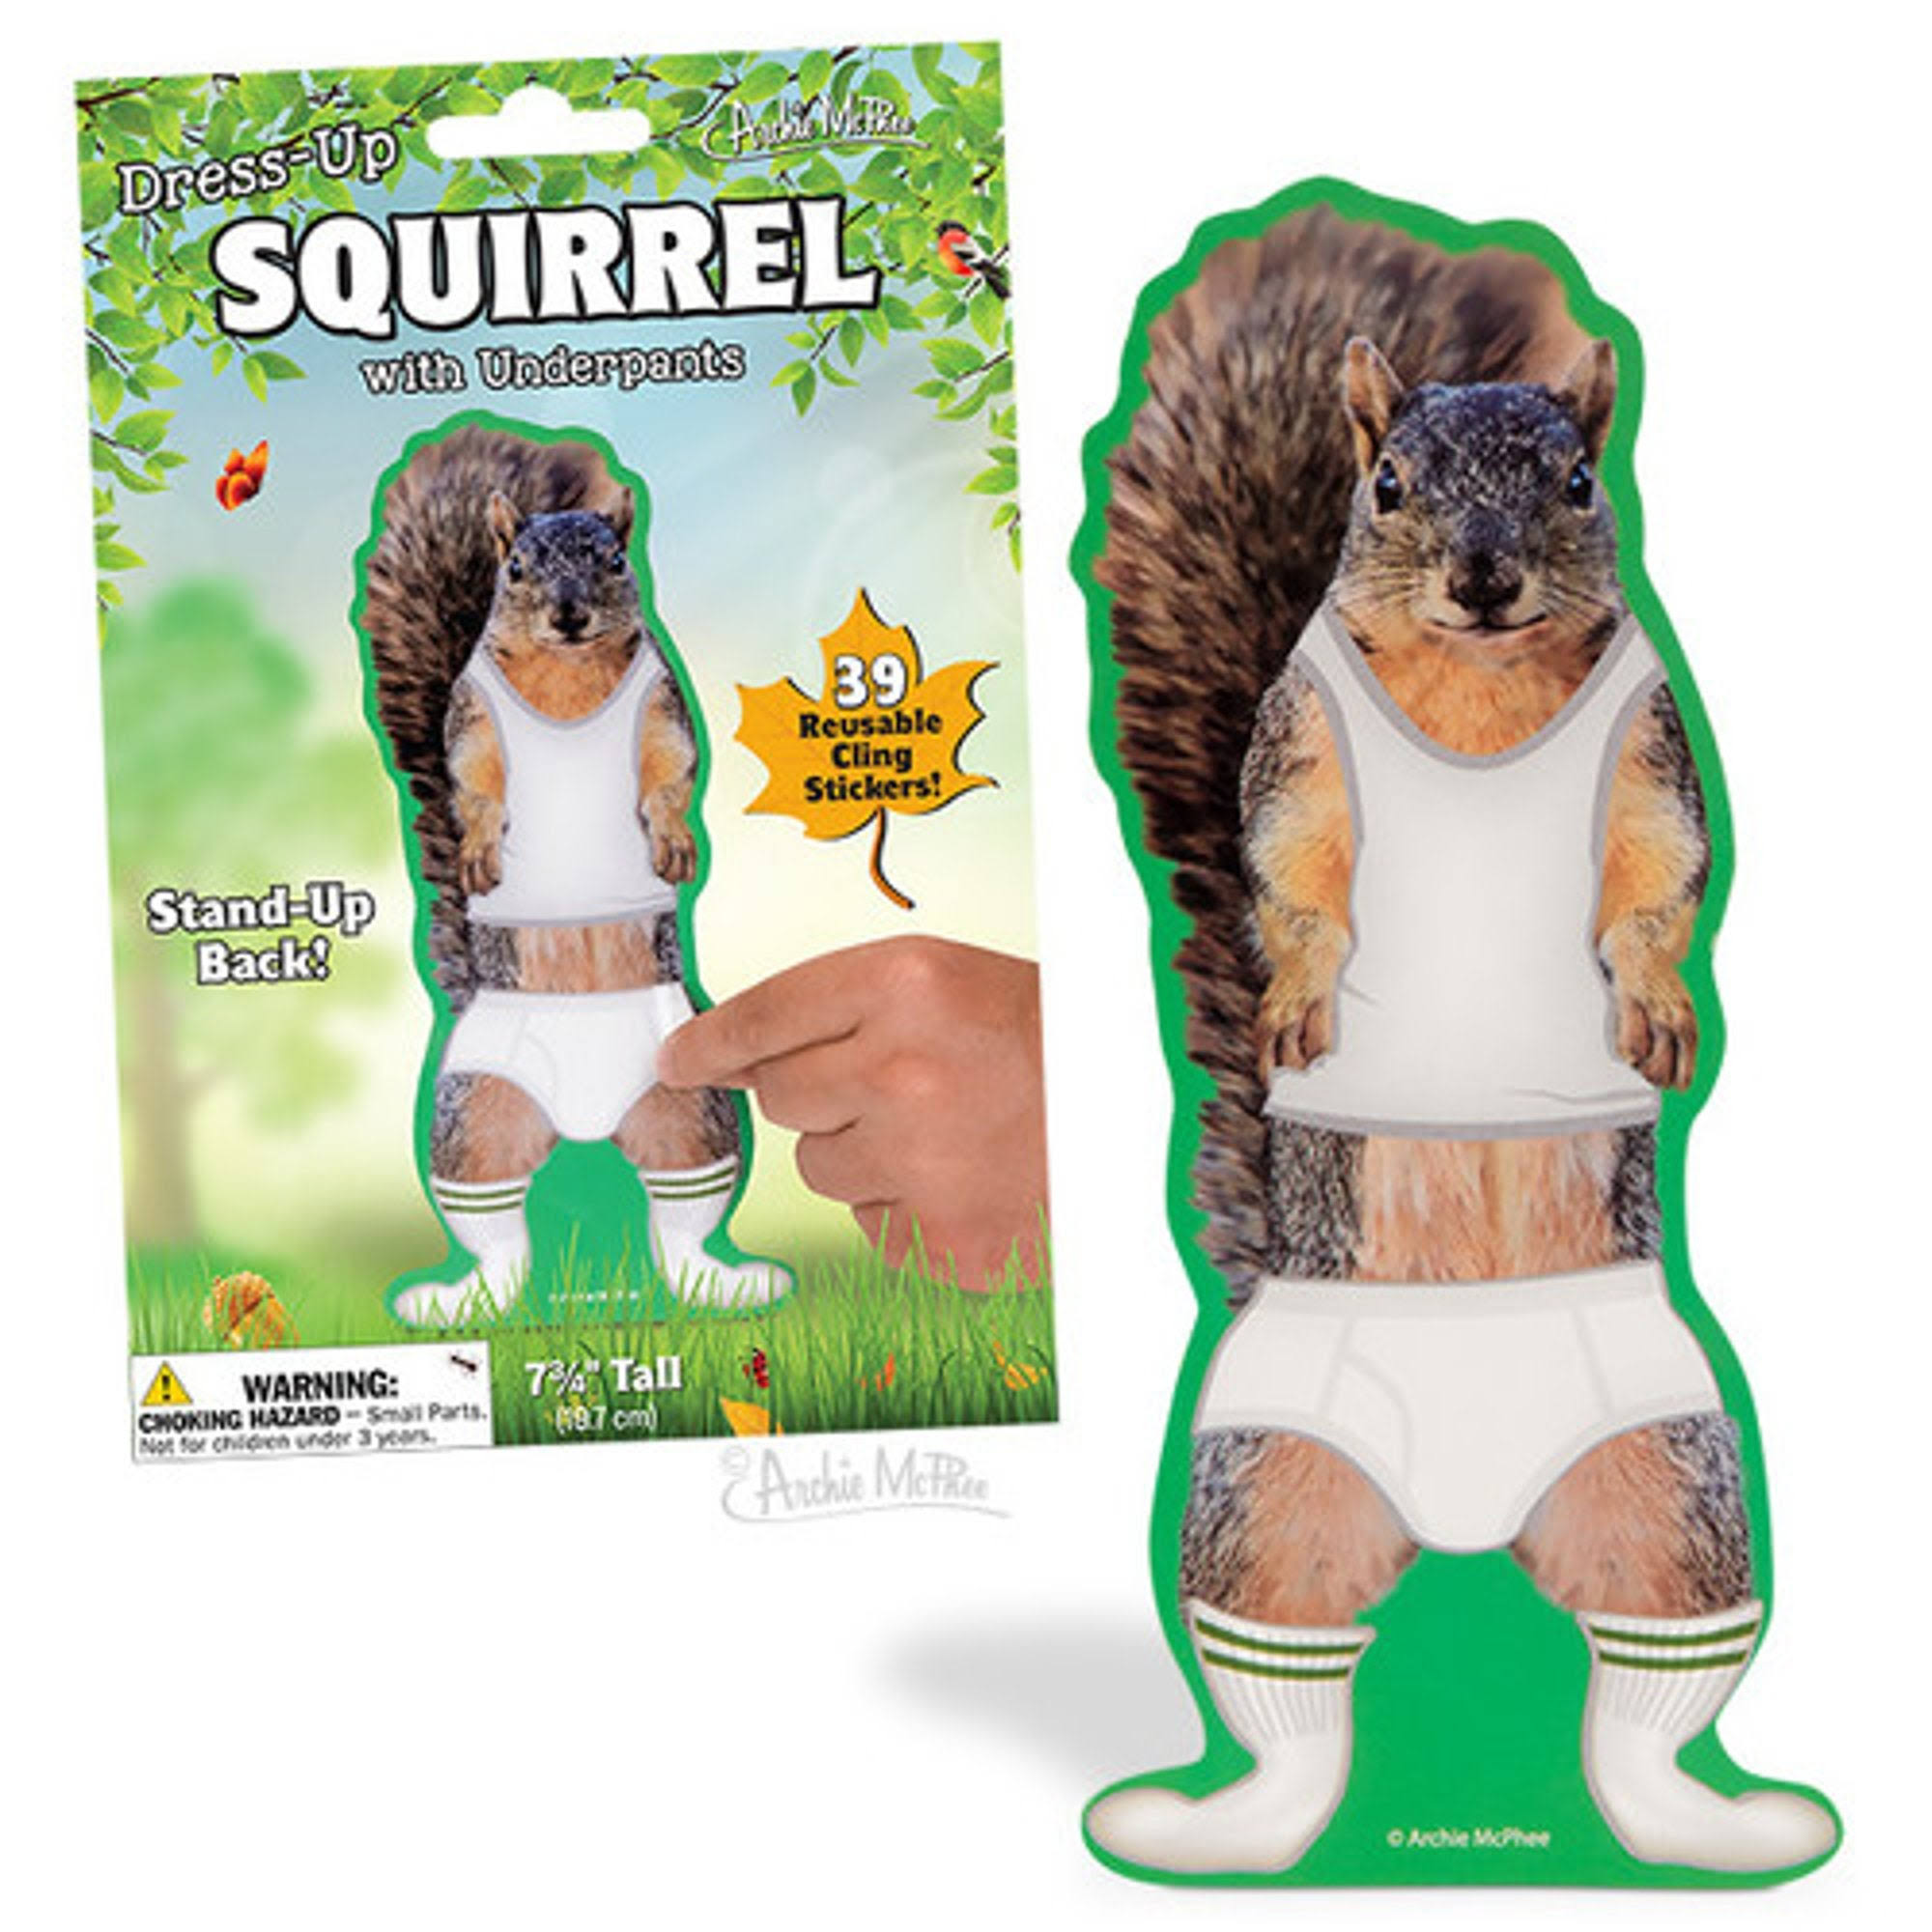 Dress-up Squirrel with Underpants Novelty Fun Gag Gift